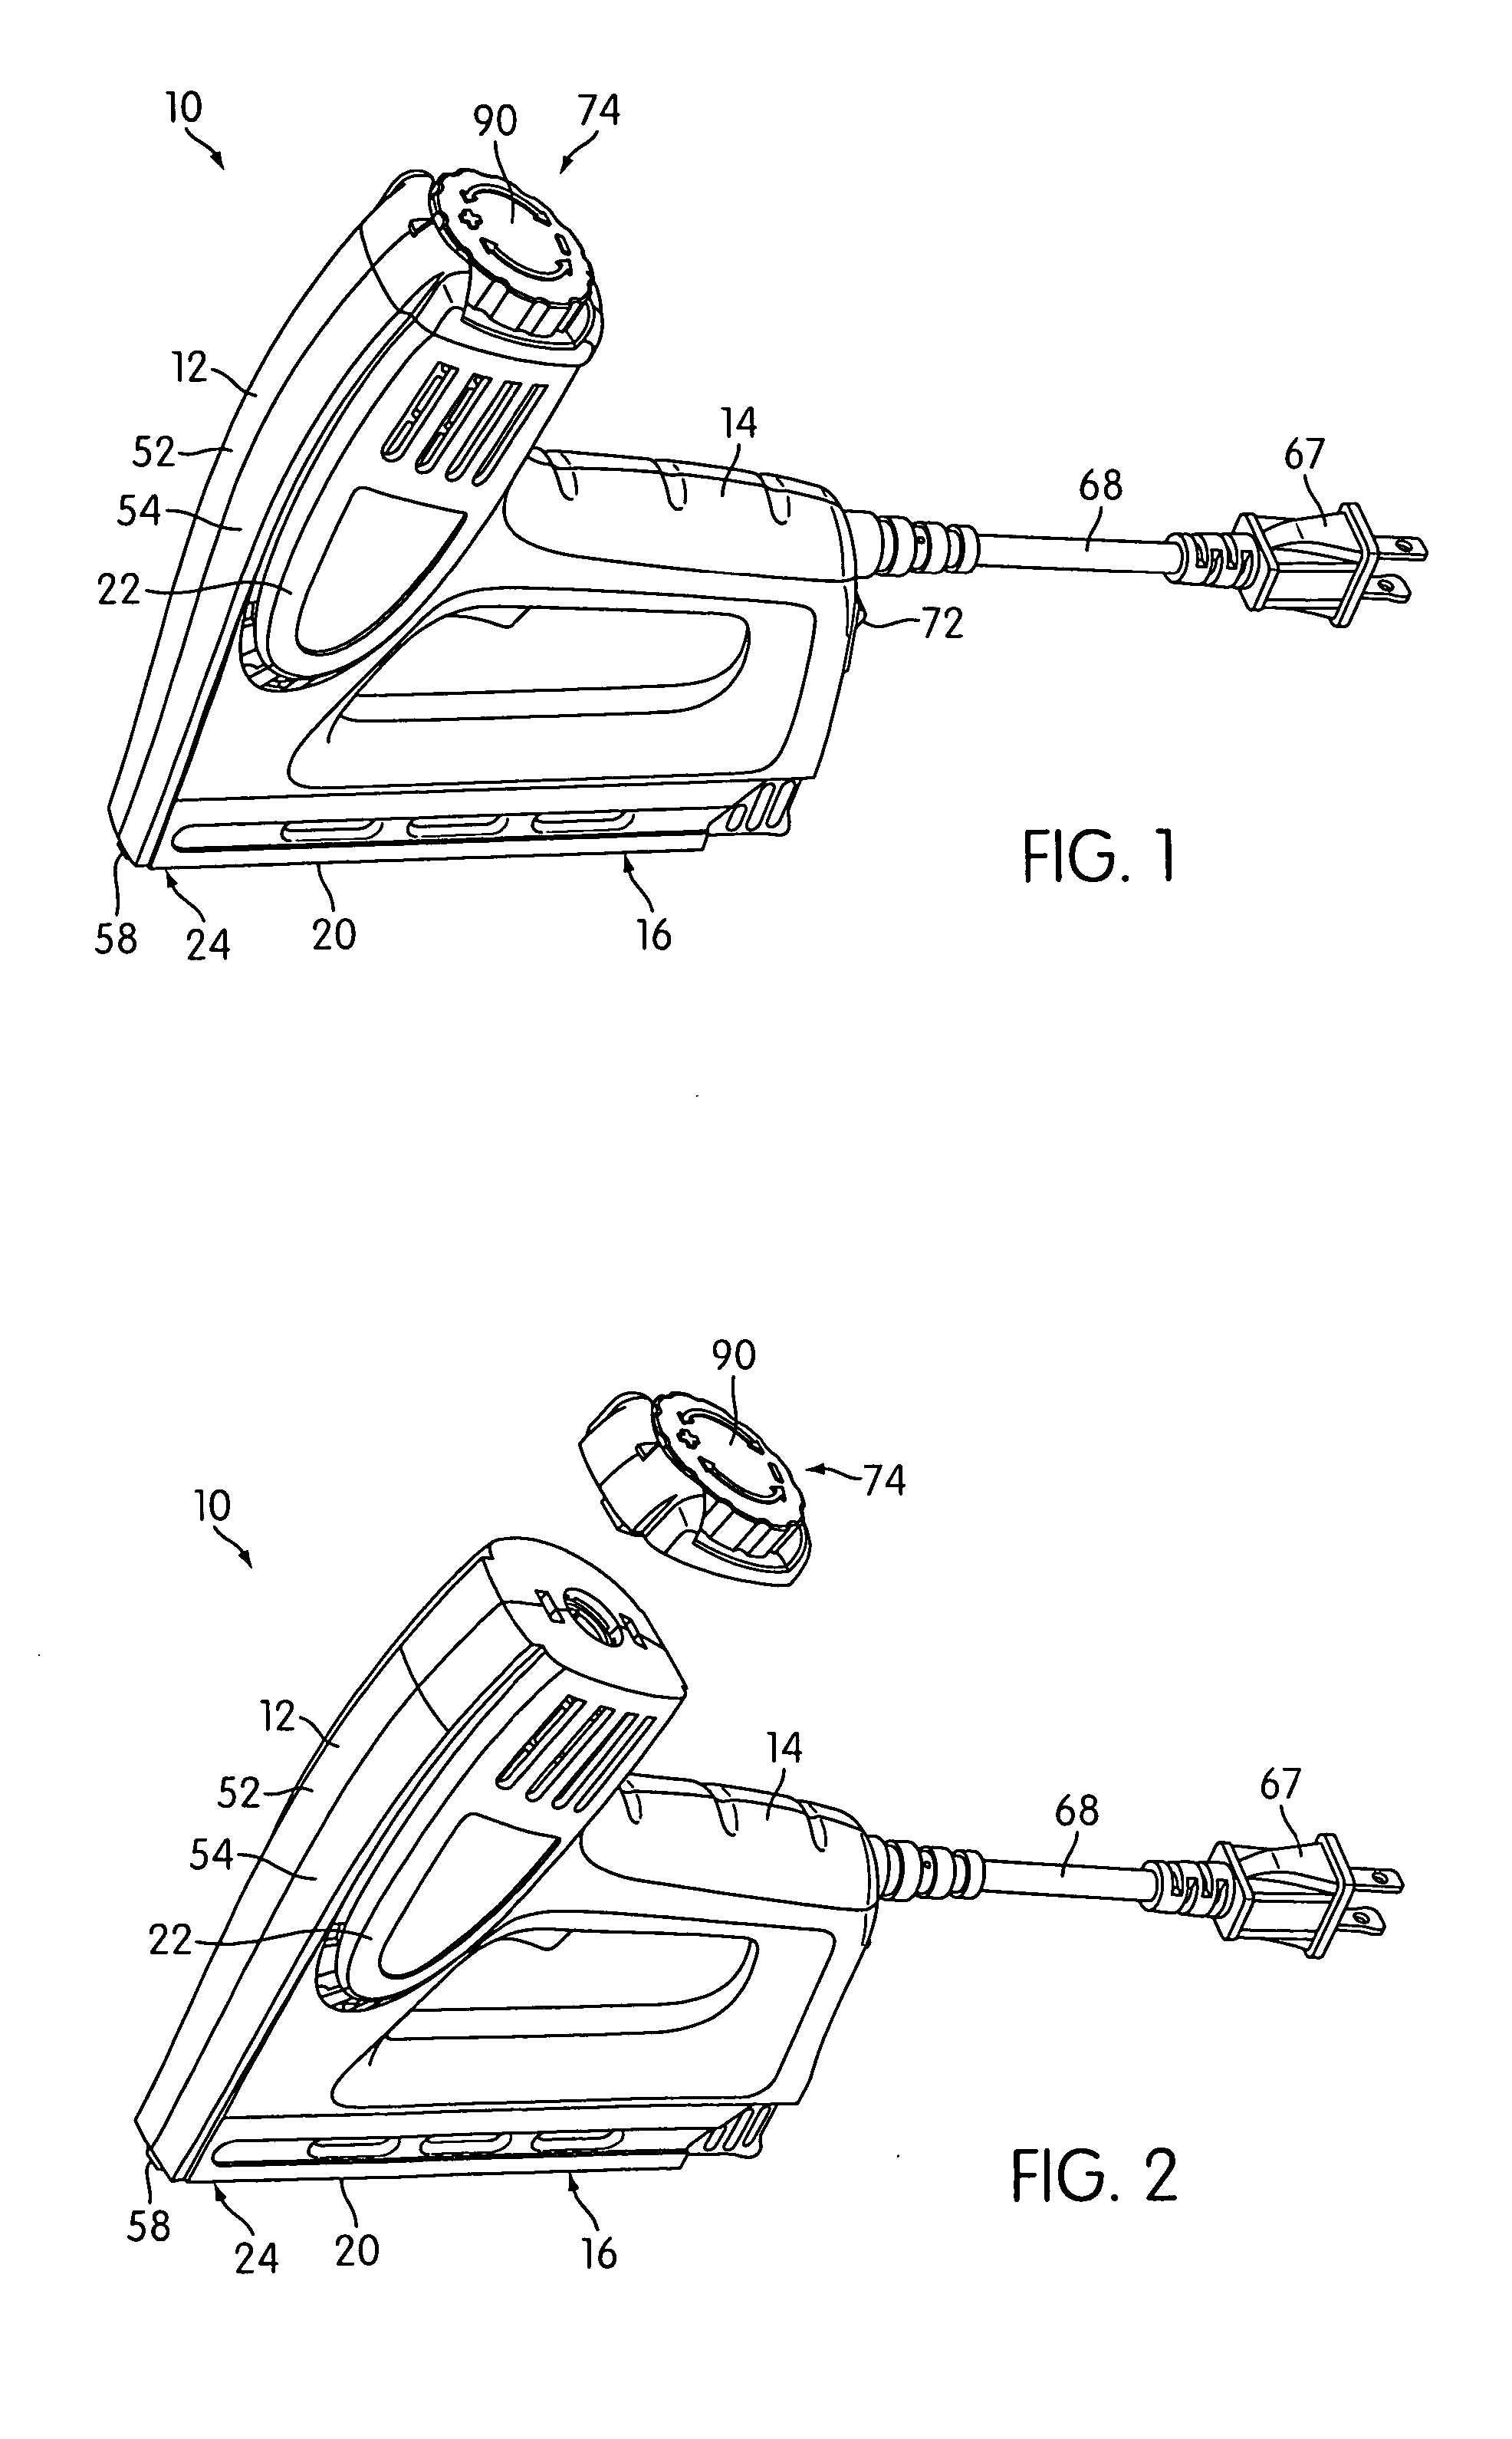 Electromagnetic stapler with a manually adjustable depth adjuster